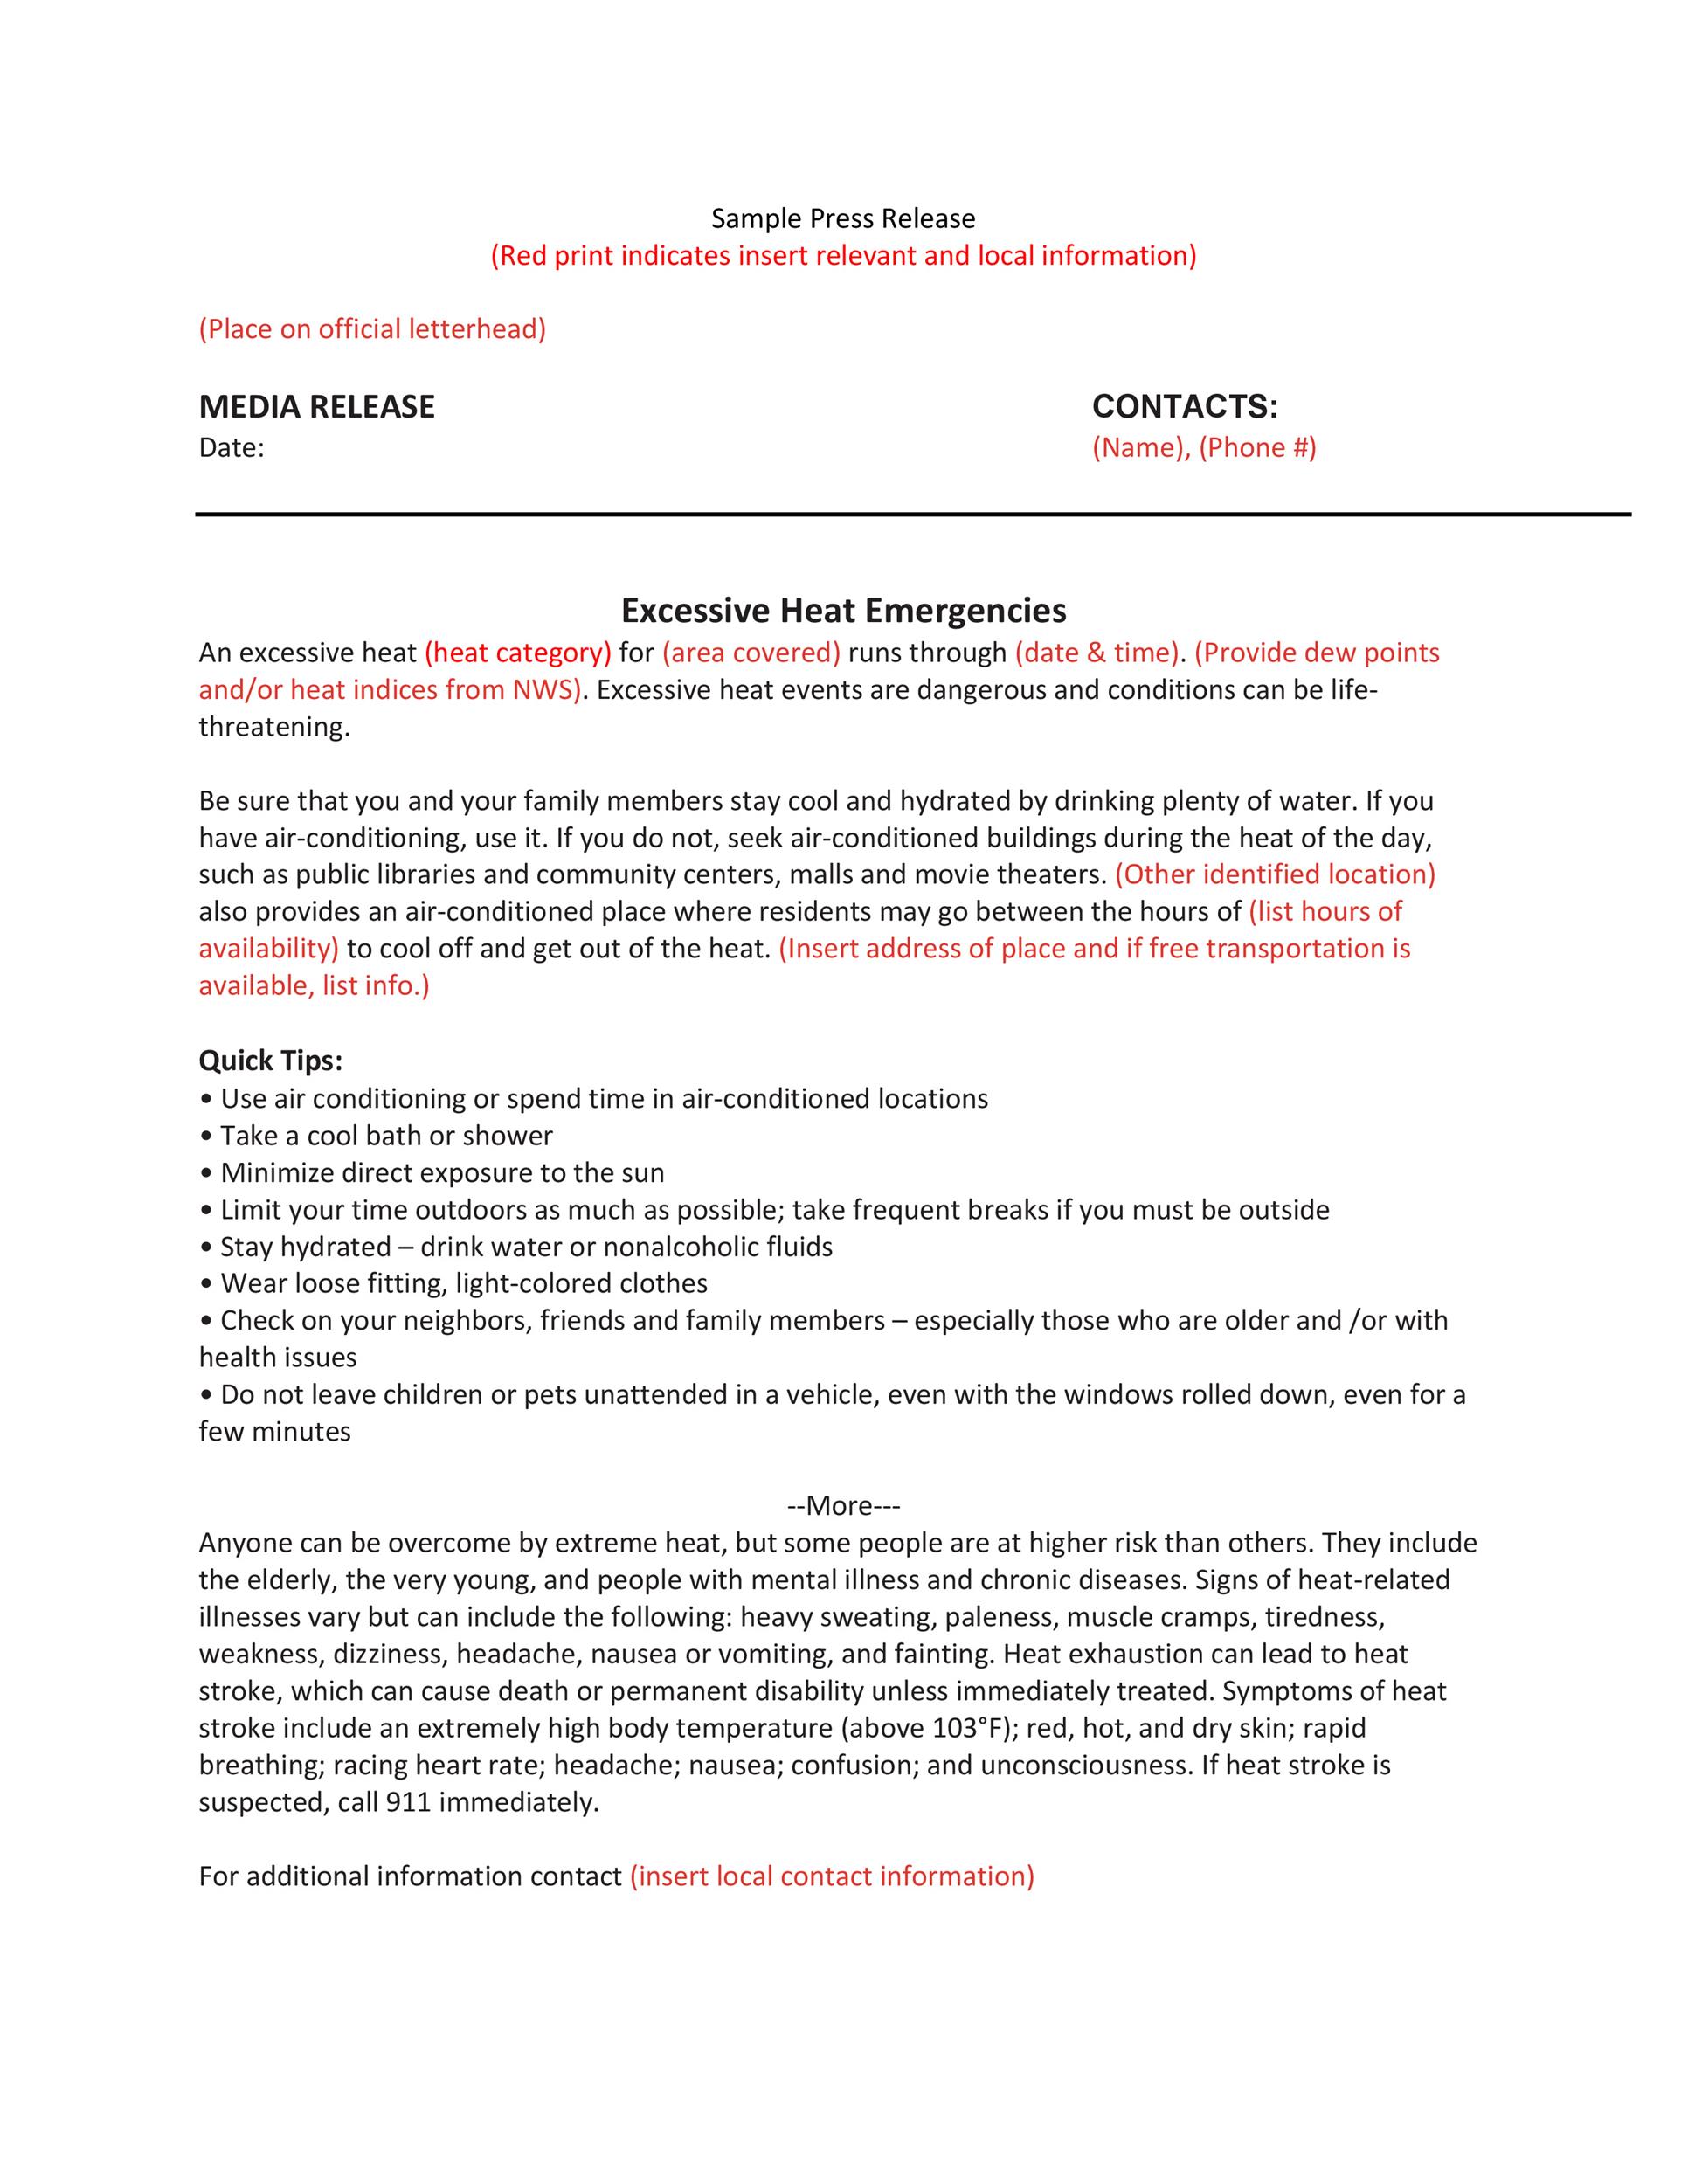 Free Press release template 34